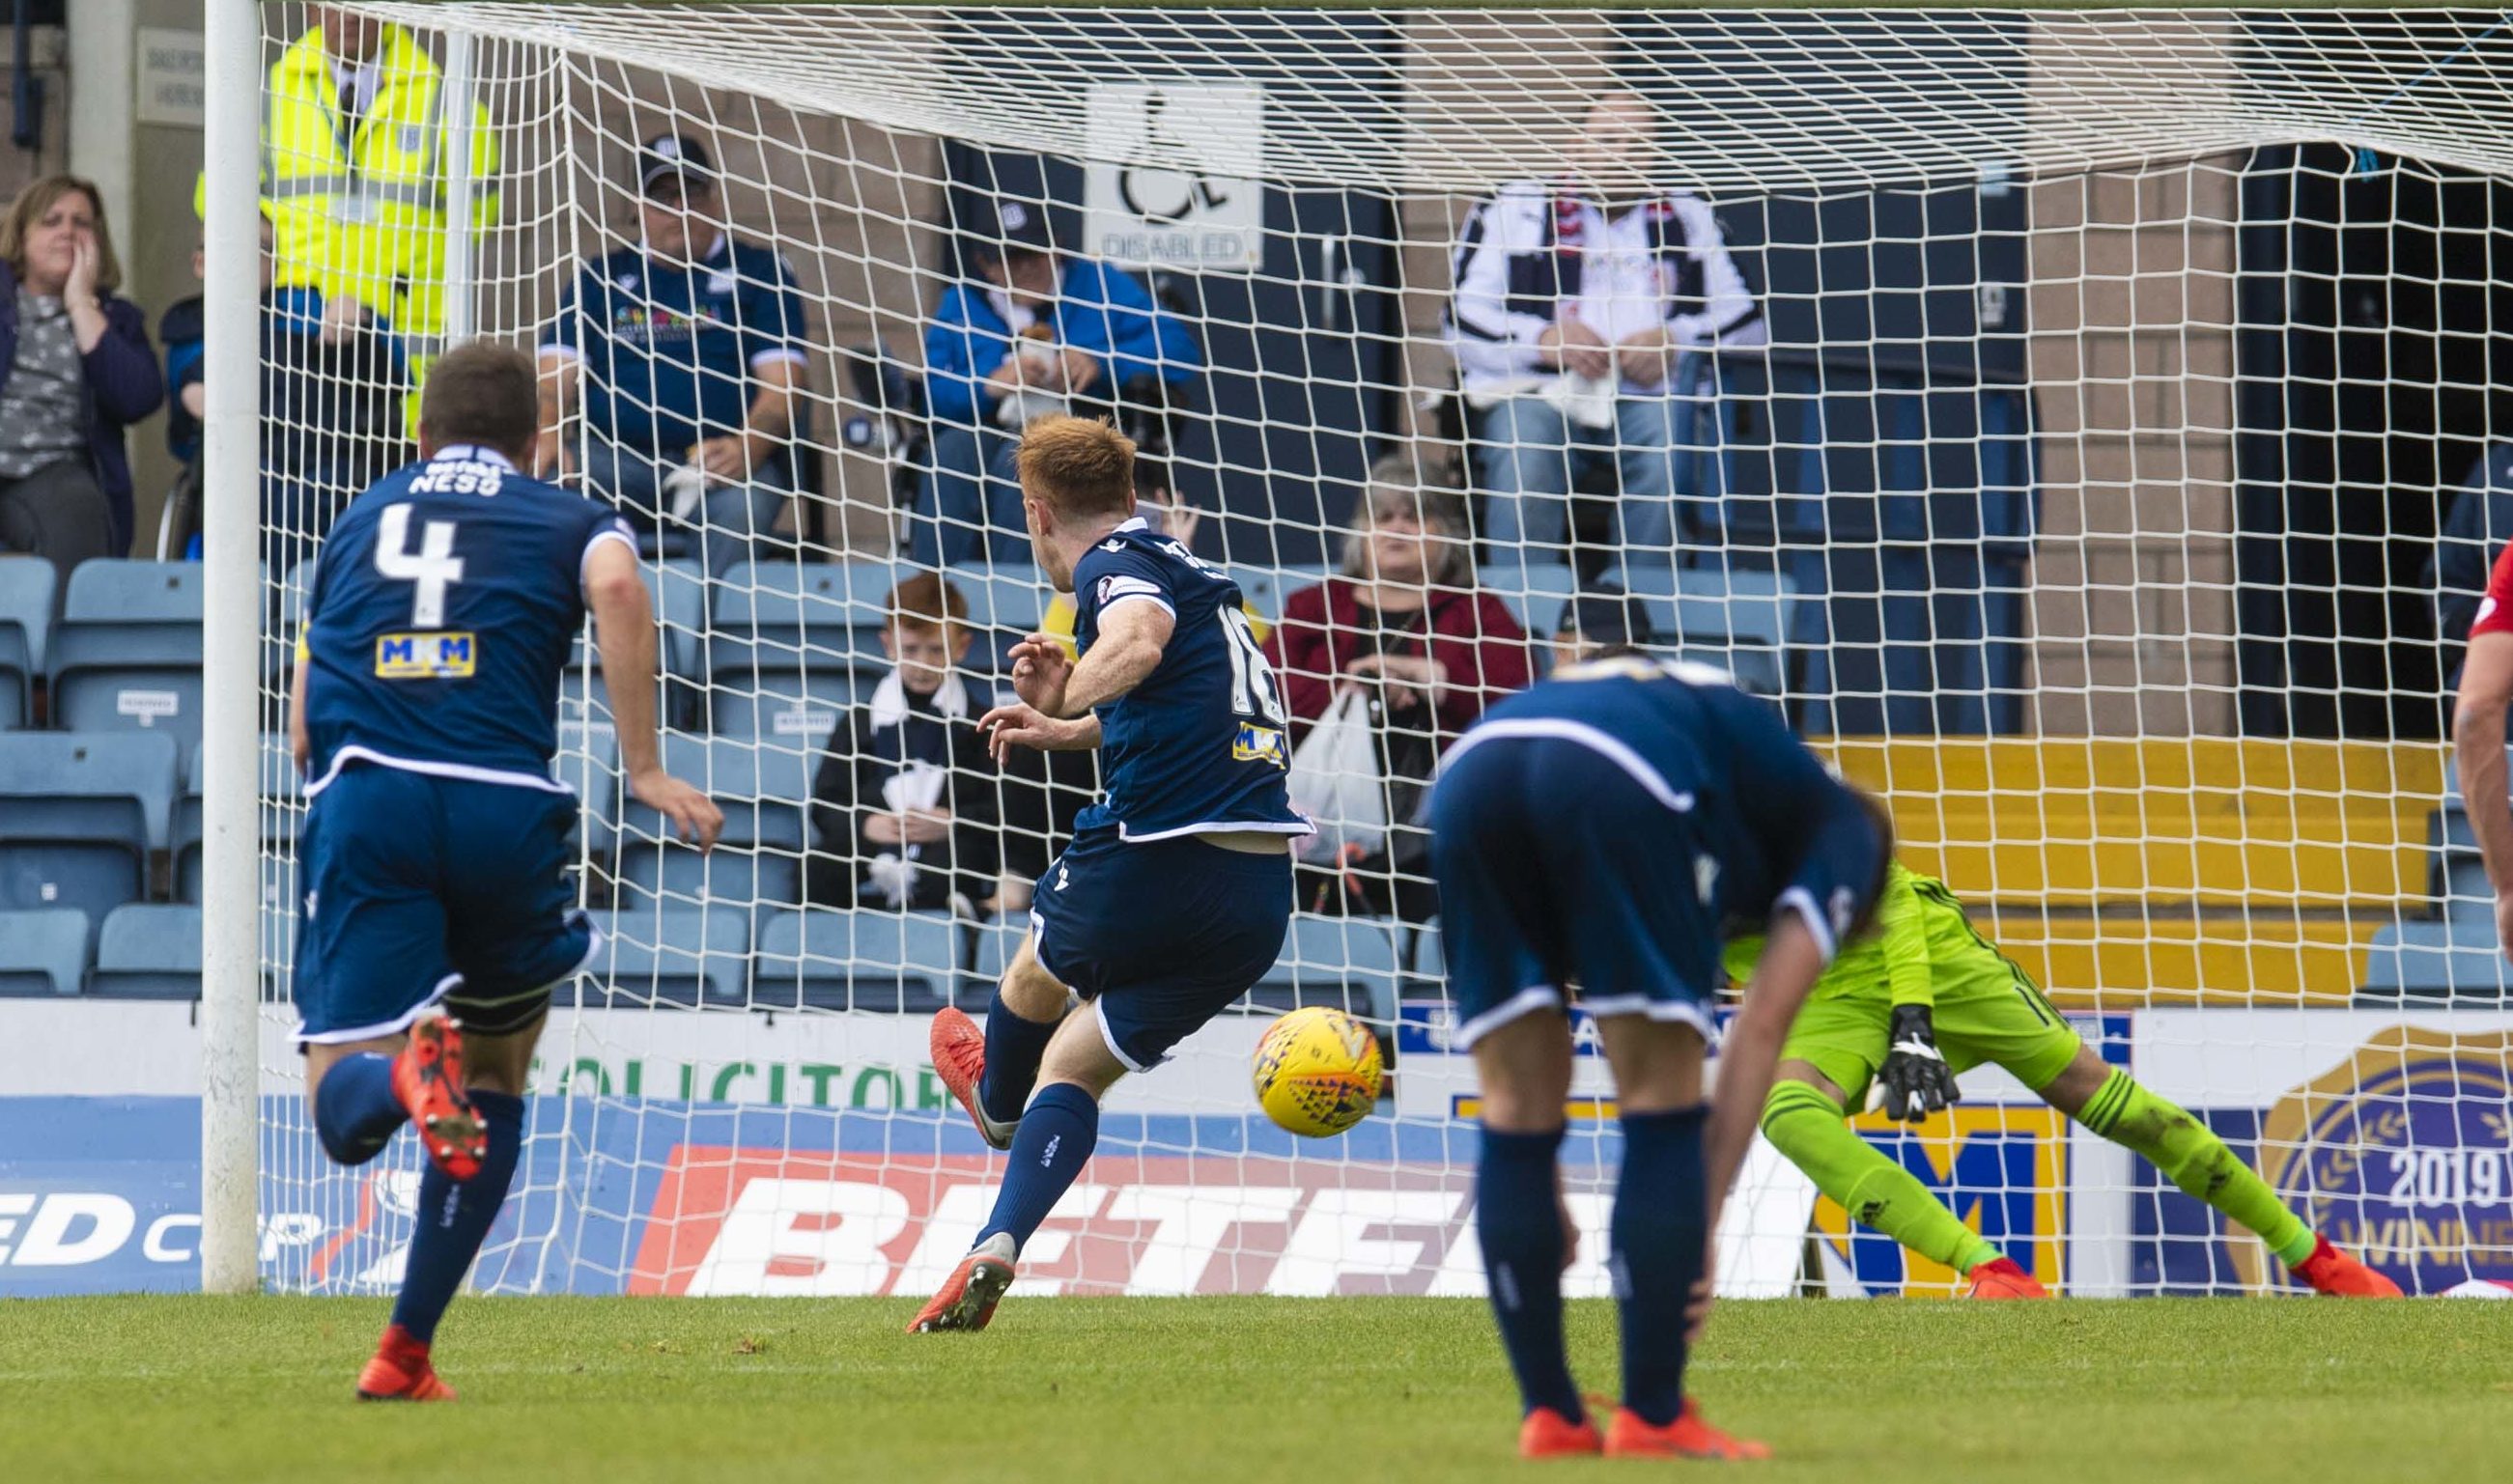 Danny Johnson scores from the spot for Dundee.